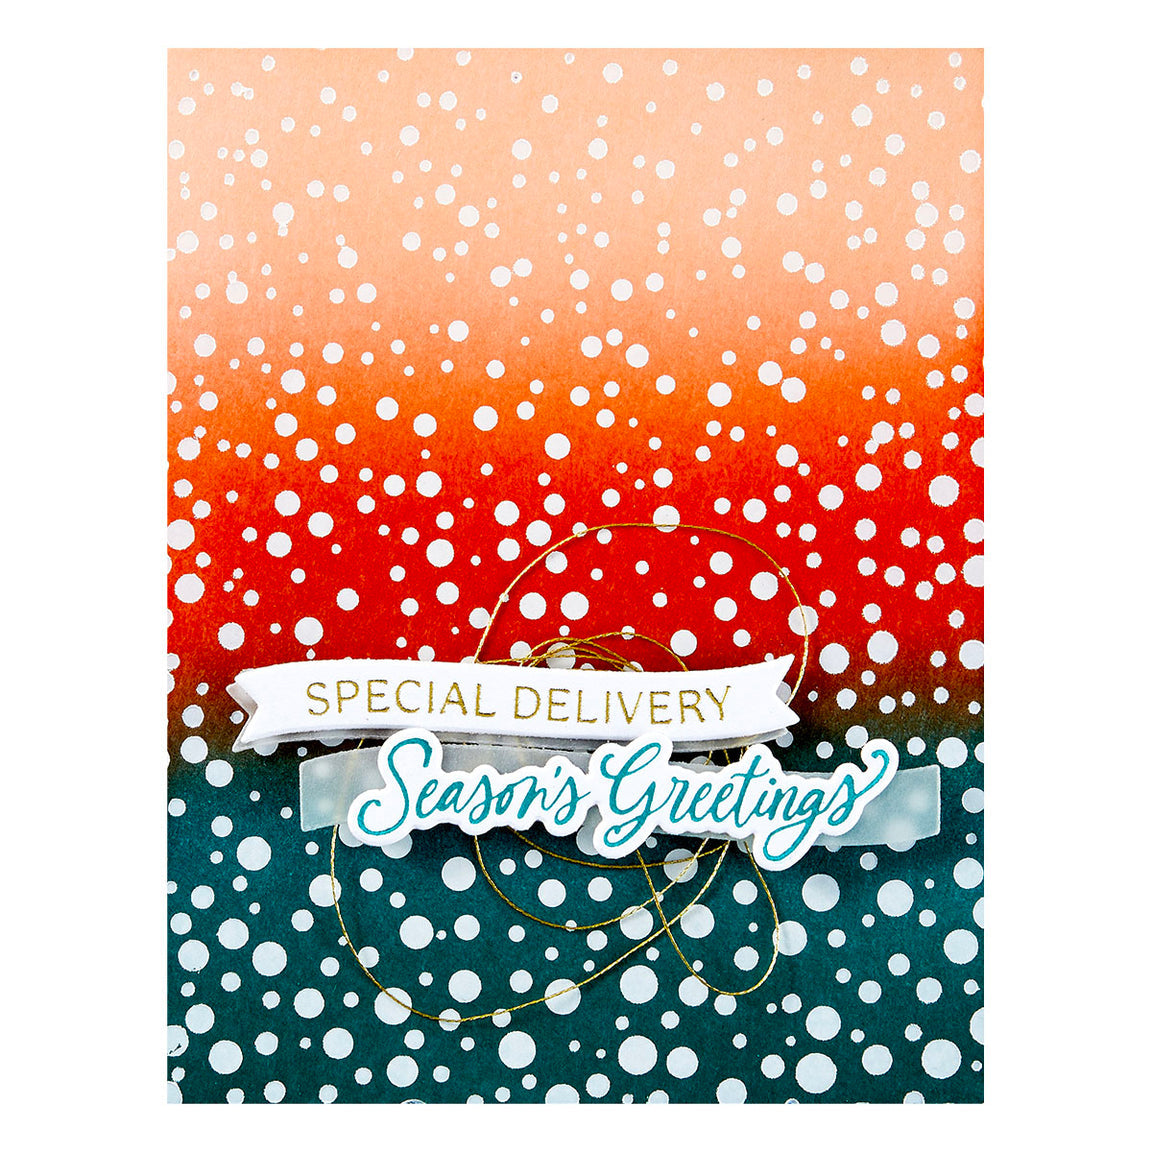 Spellbinders Sprinkled Confetti Press Plate - Home for the Holidays Collection